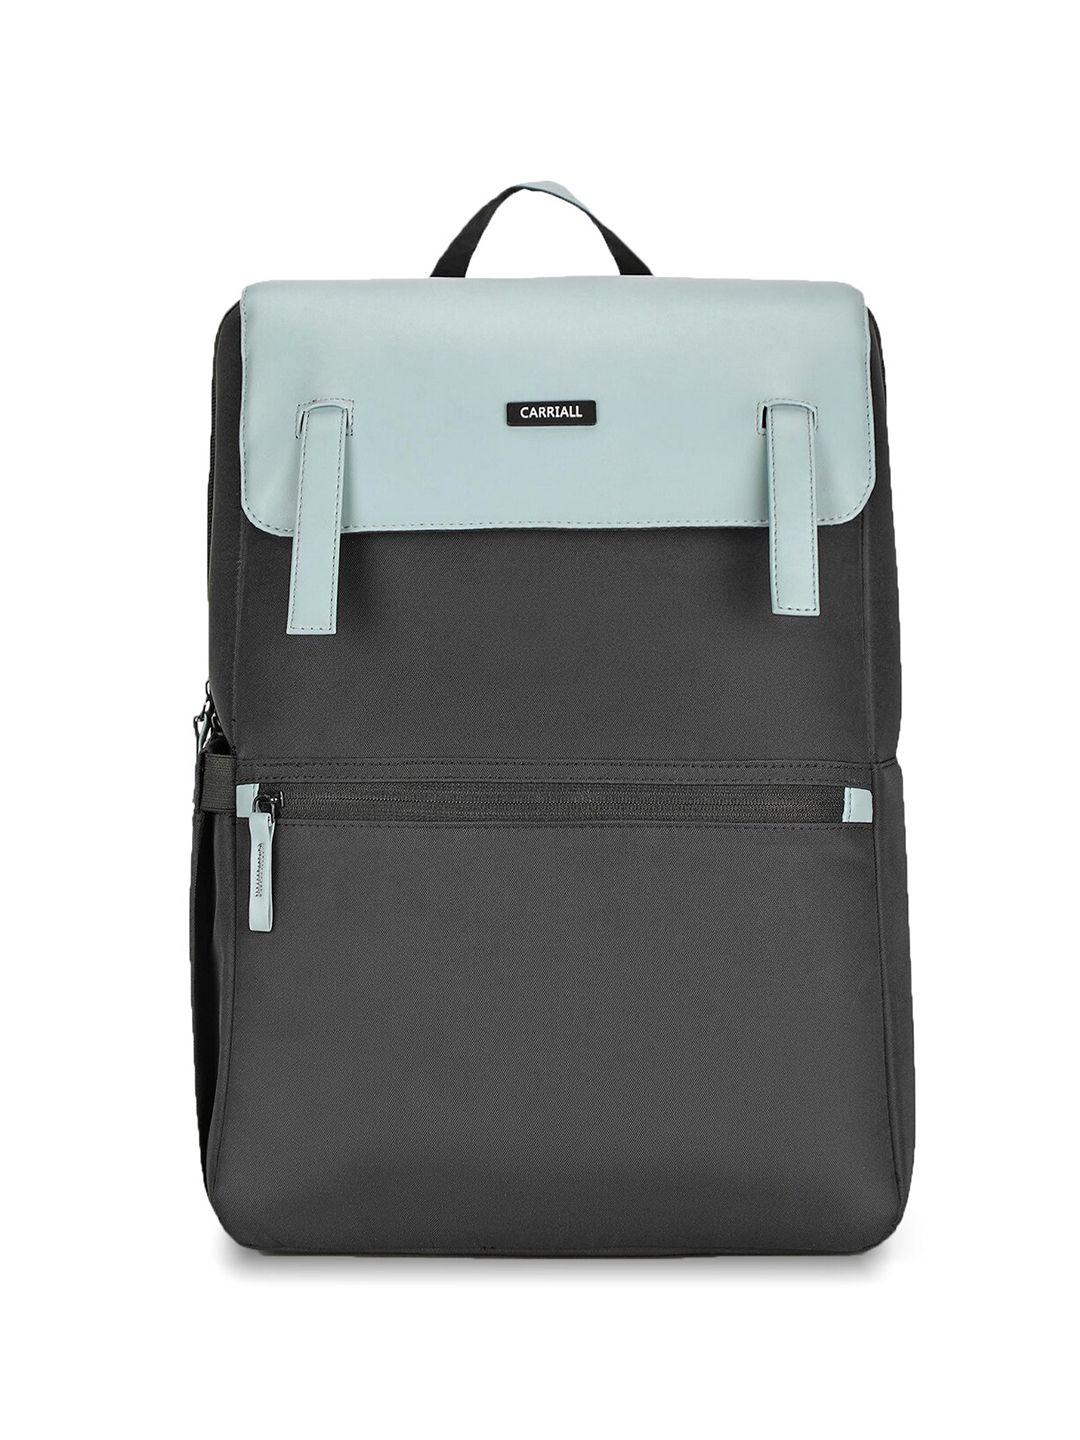 carriall unisex backpack with compression straps